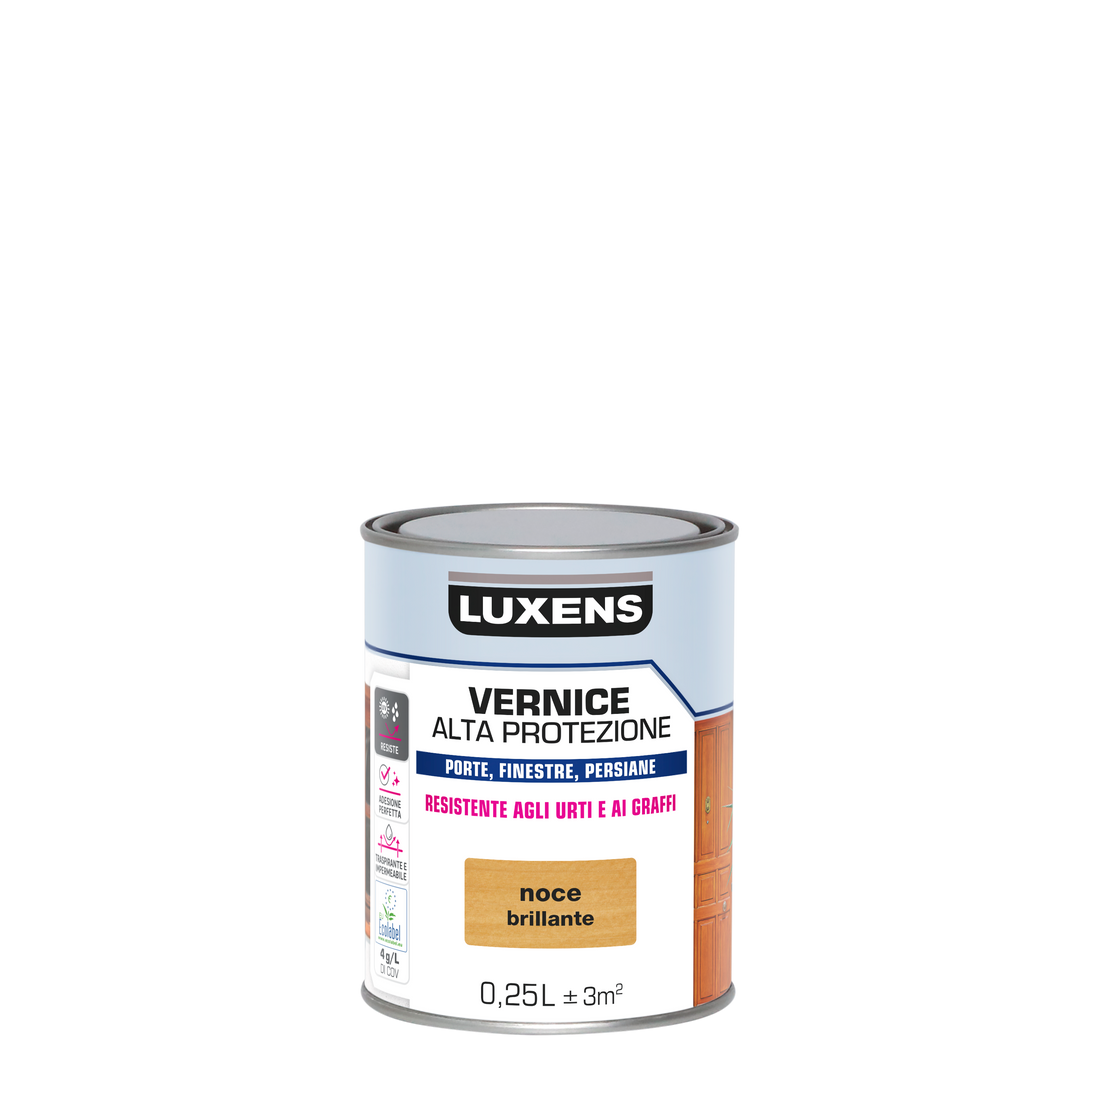 LUXENS HIGH-PROTECTION WALNUT HIGH-GLOSS WATER-BASED WOOD VARNISH 250 ML